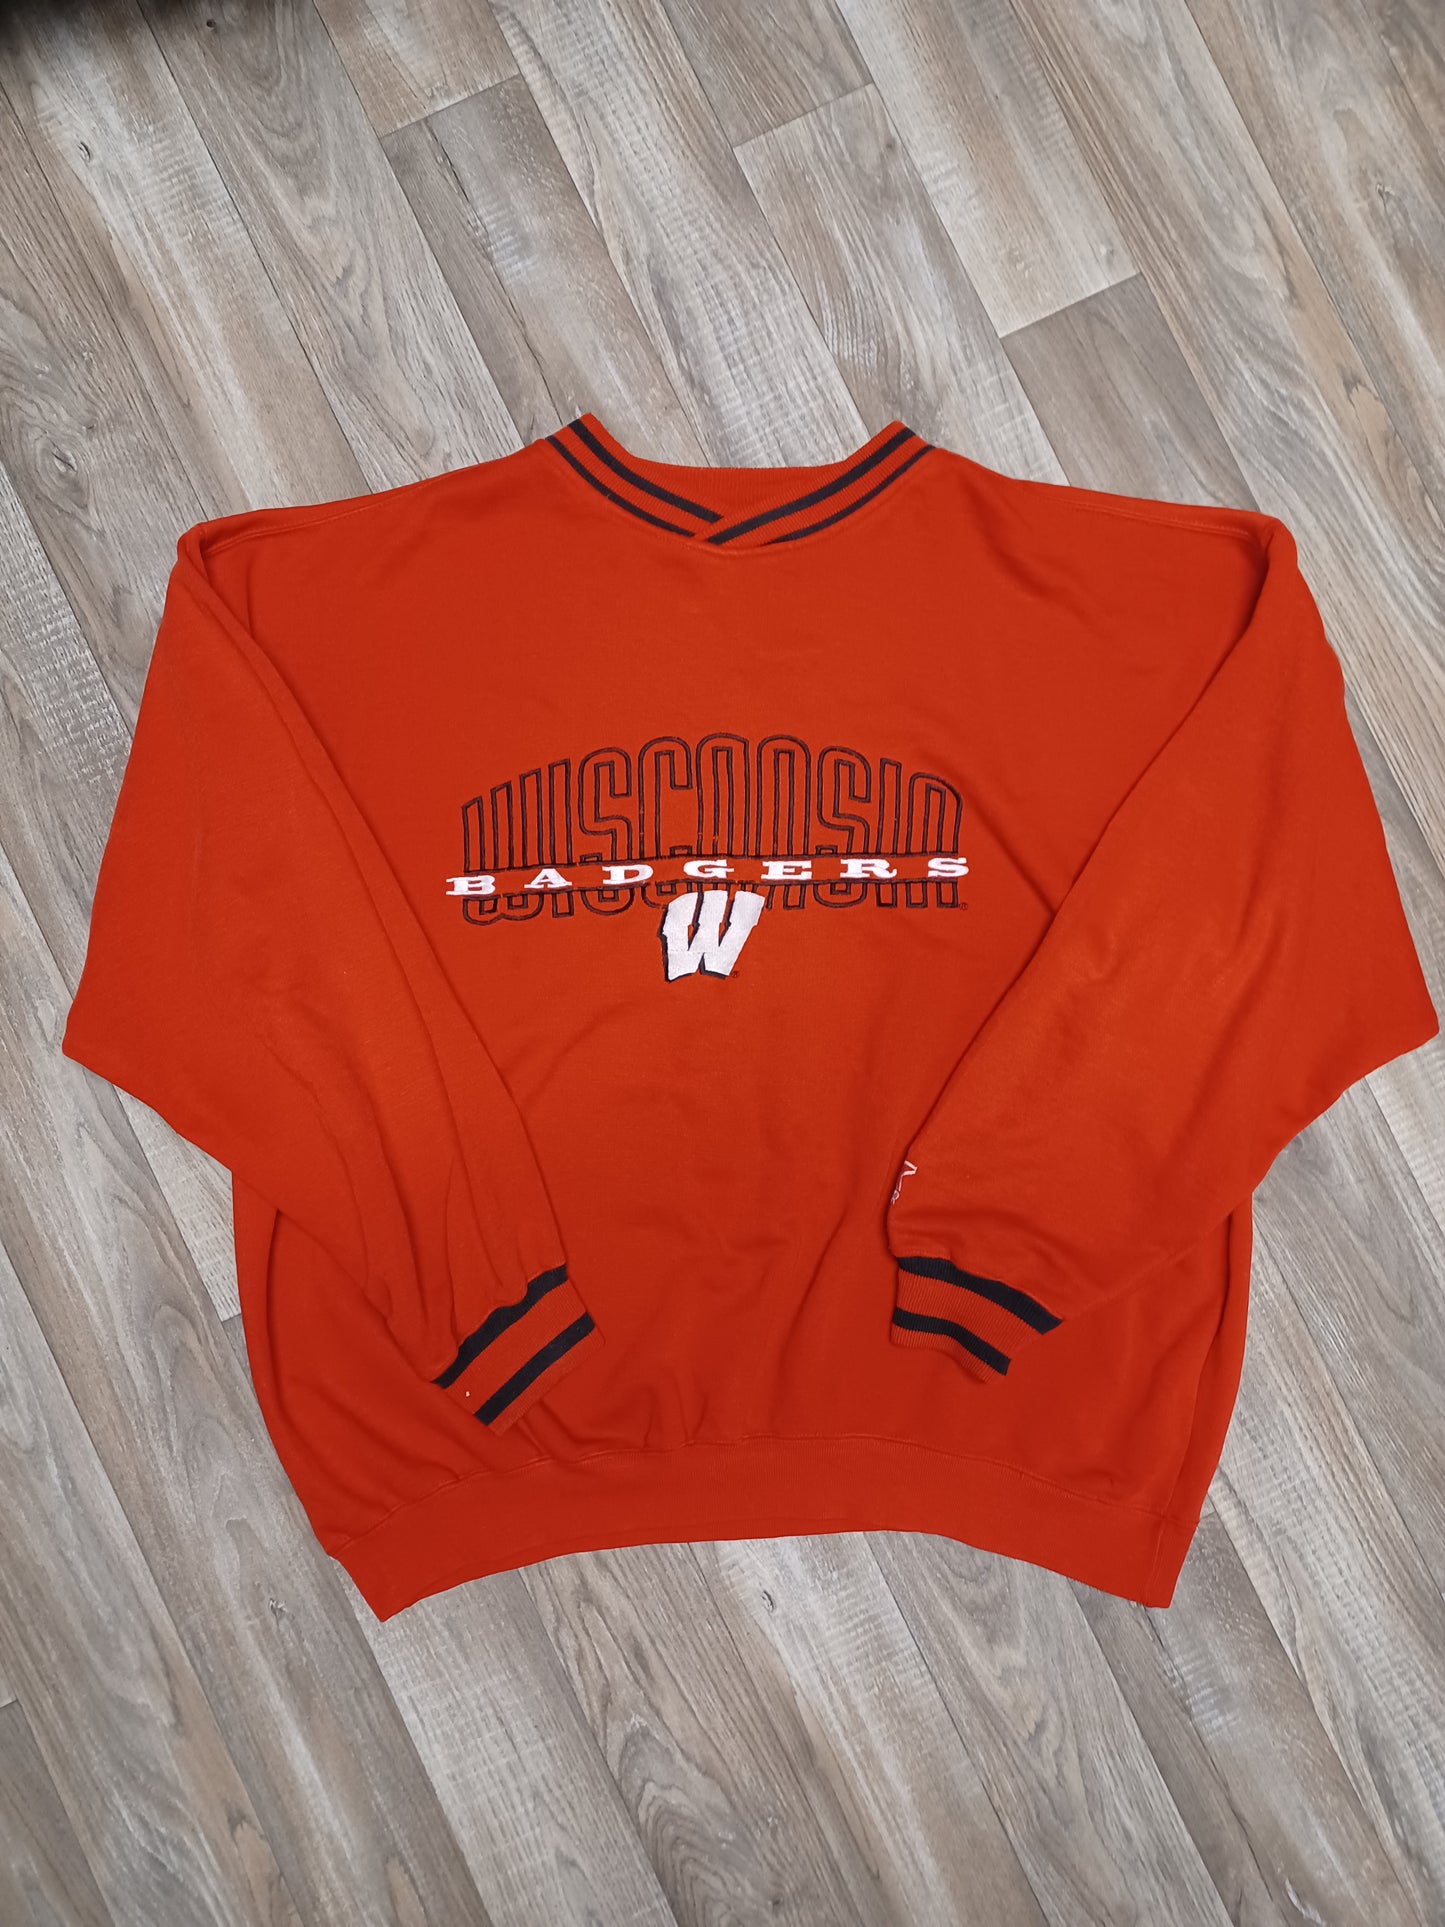 Wisconsin Badgers Sweater Size XL